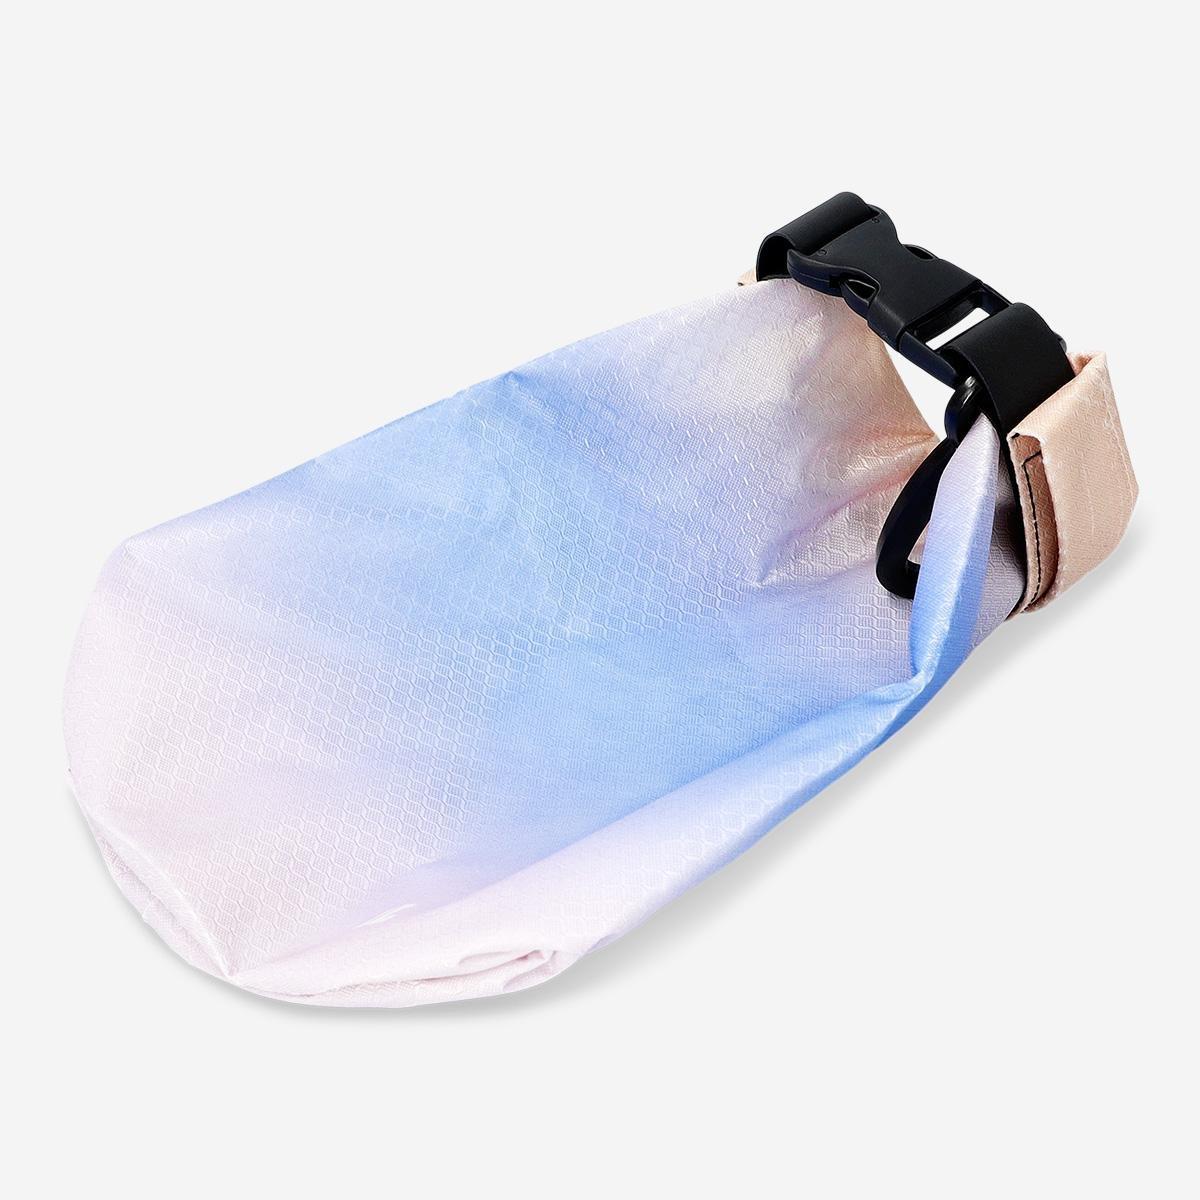 Laundry bag. Water-repellent